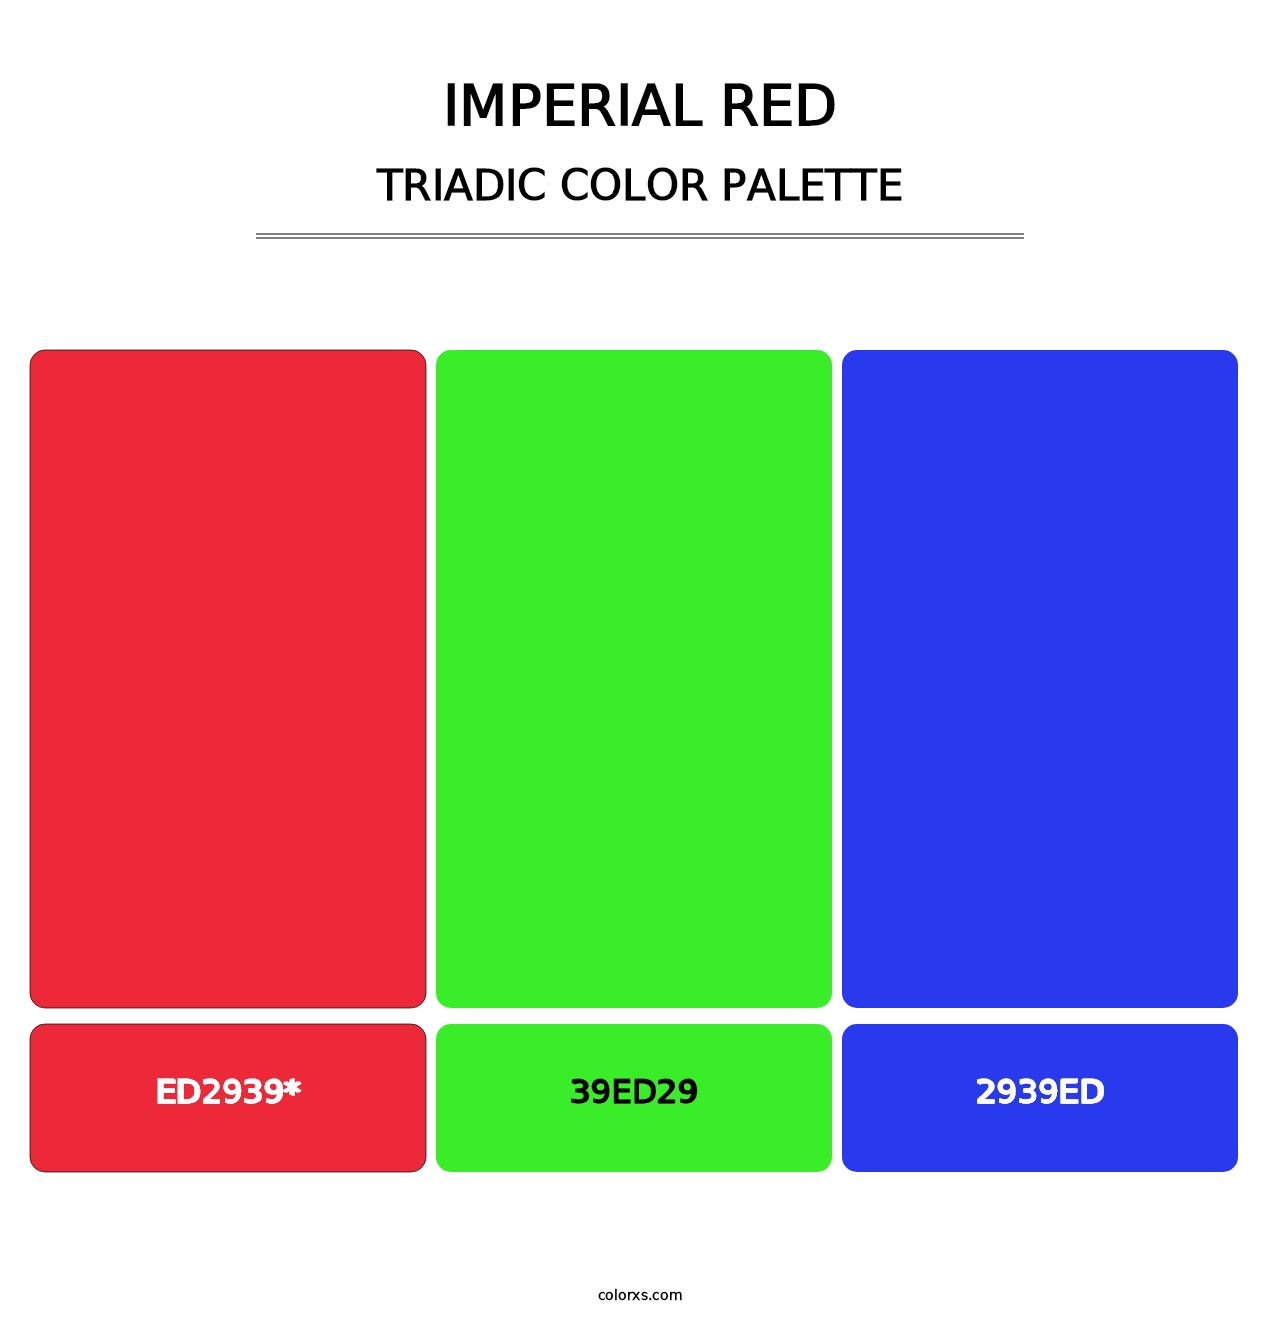 Imperial Red - Triadic Color Palette